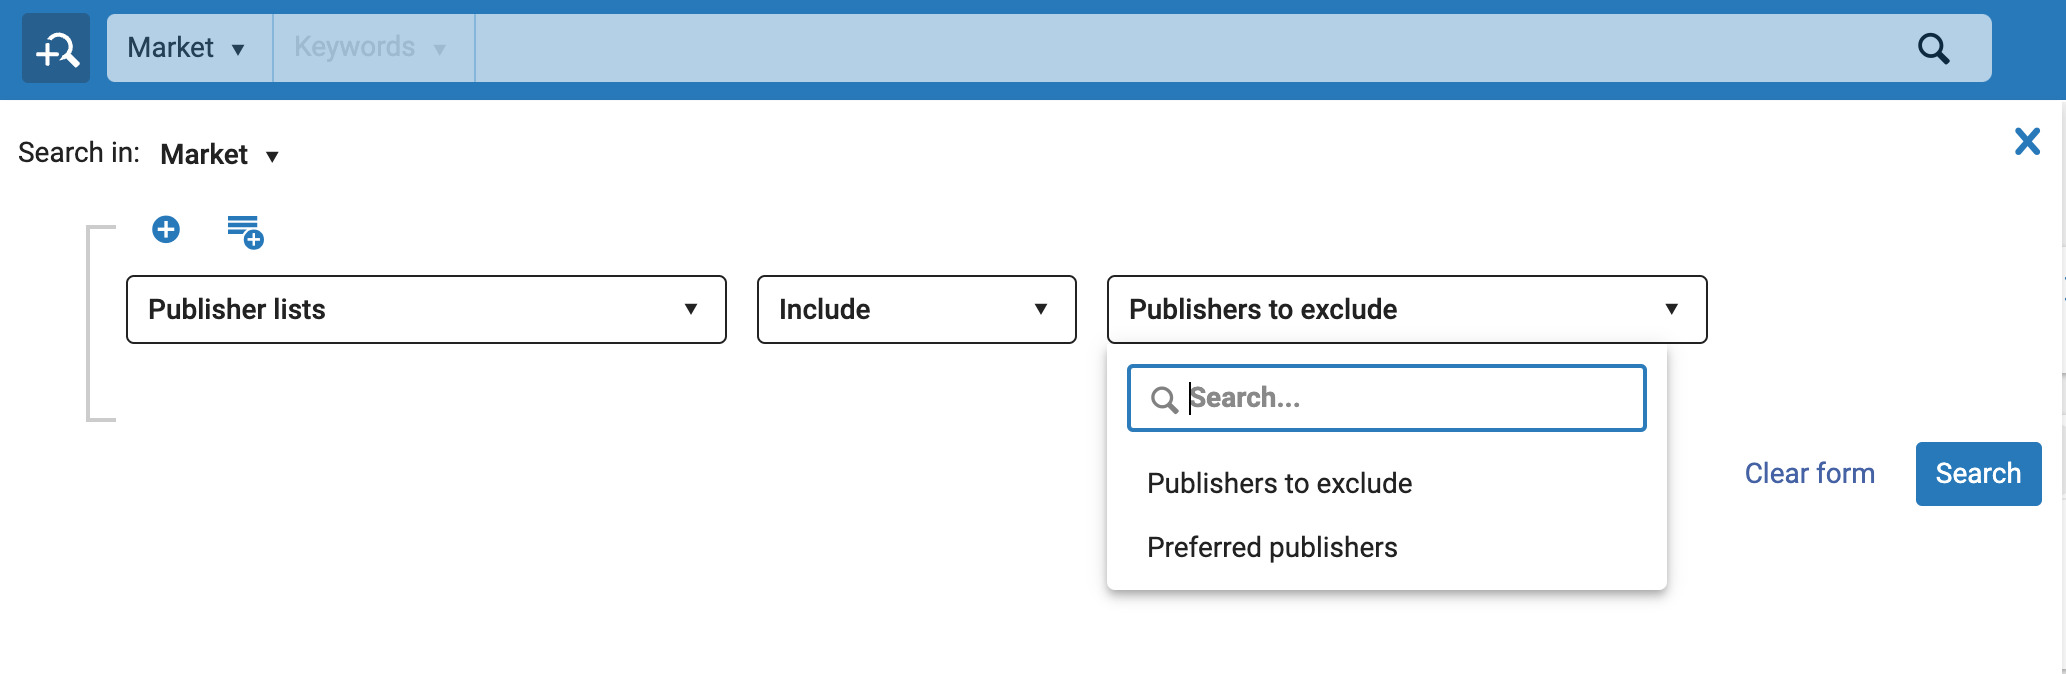 Publisher lists in the query builder